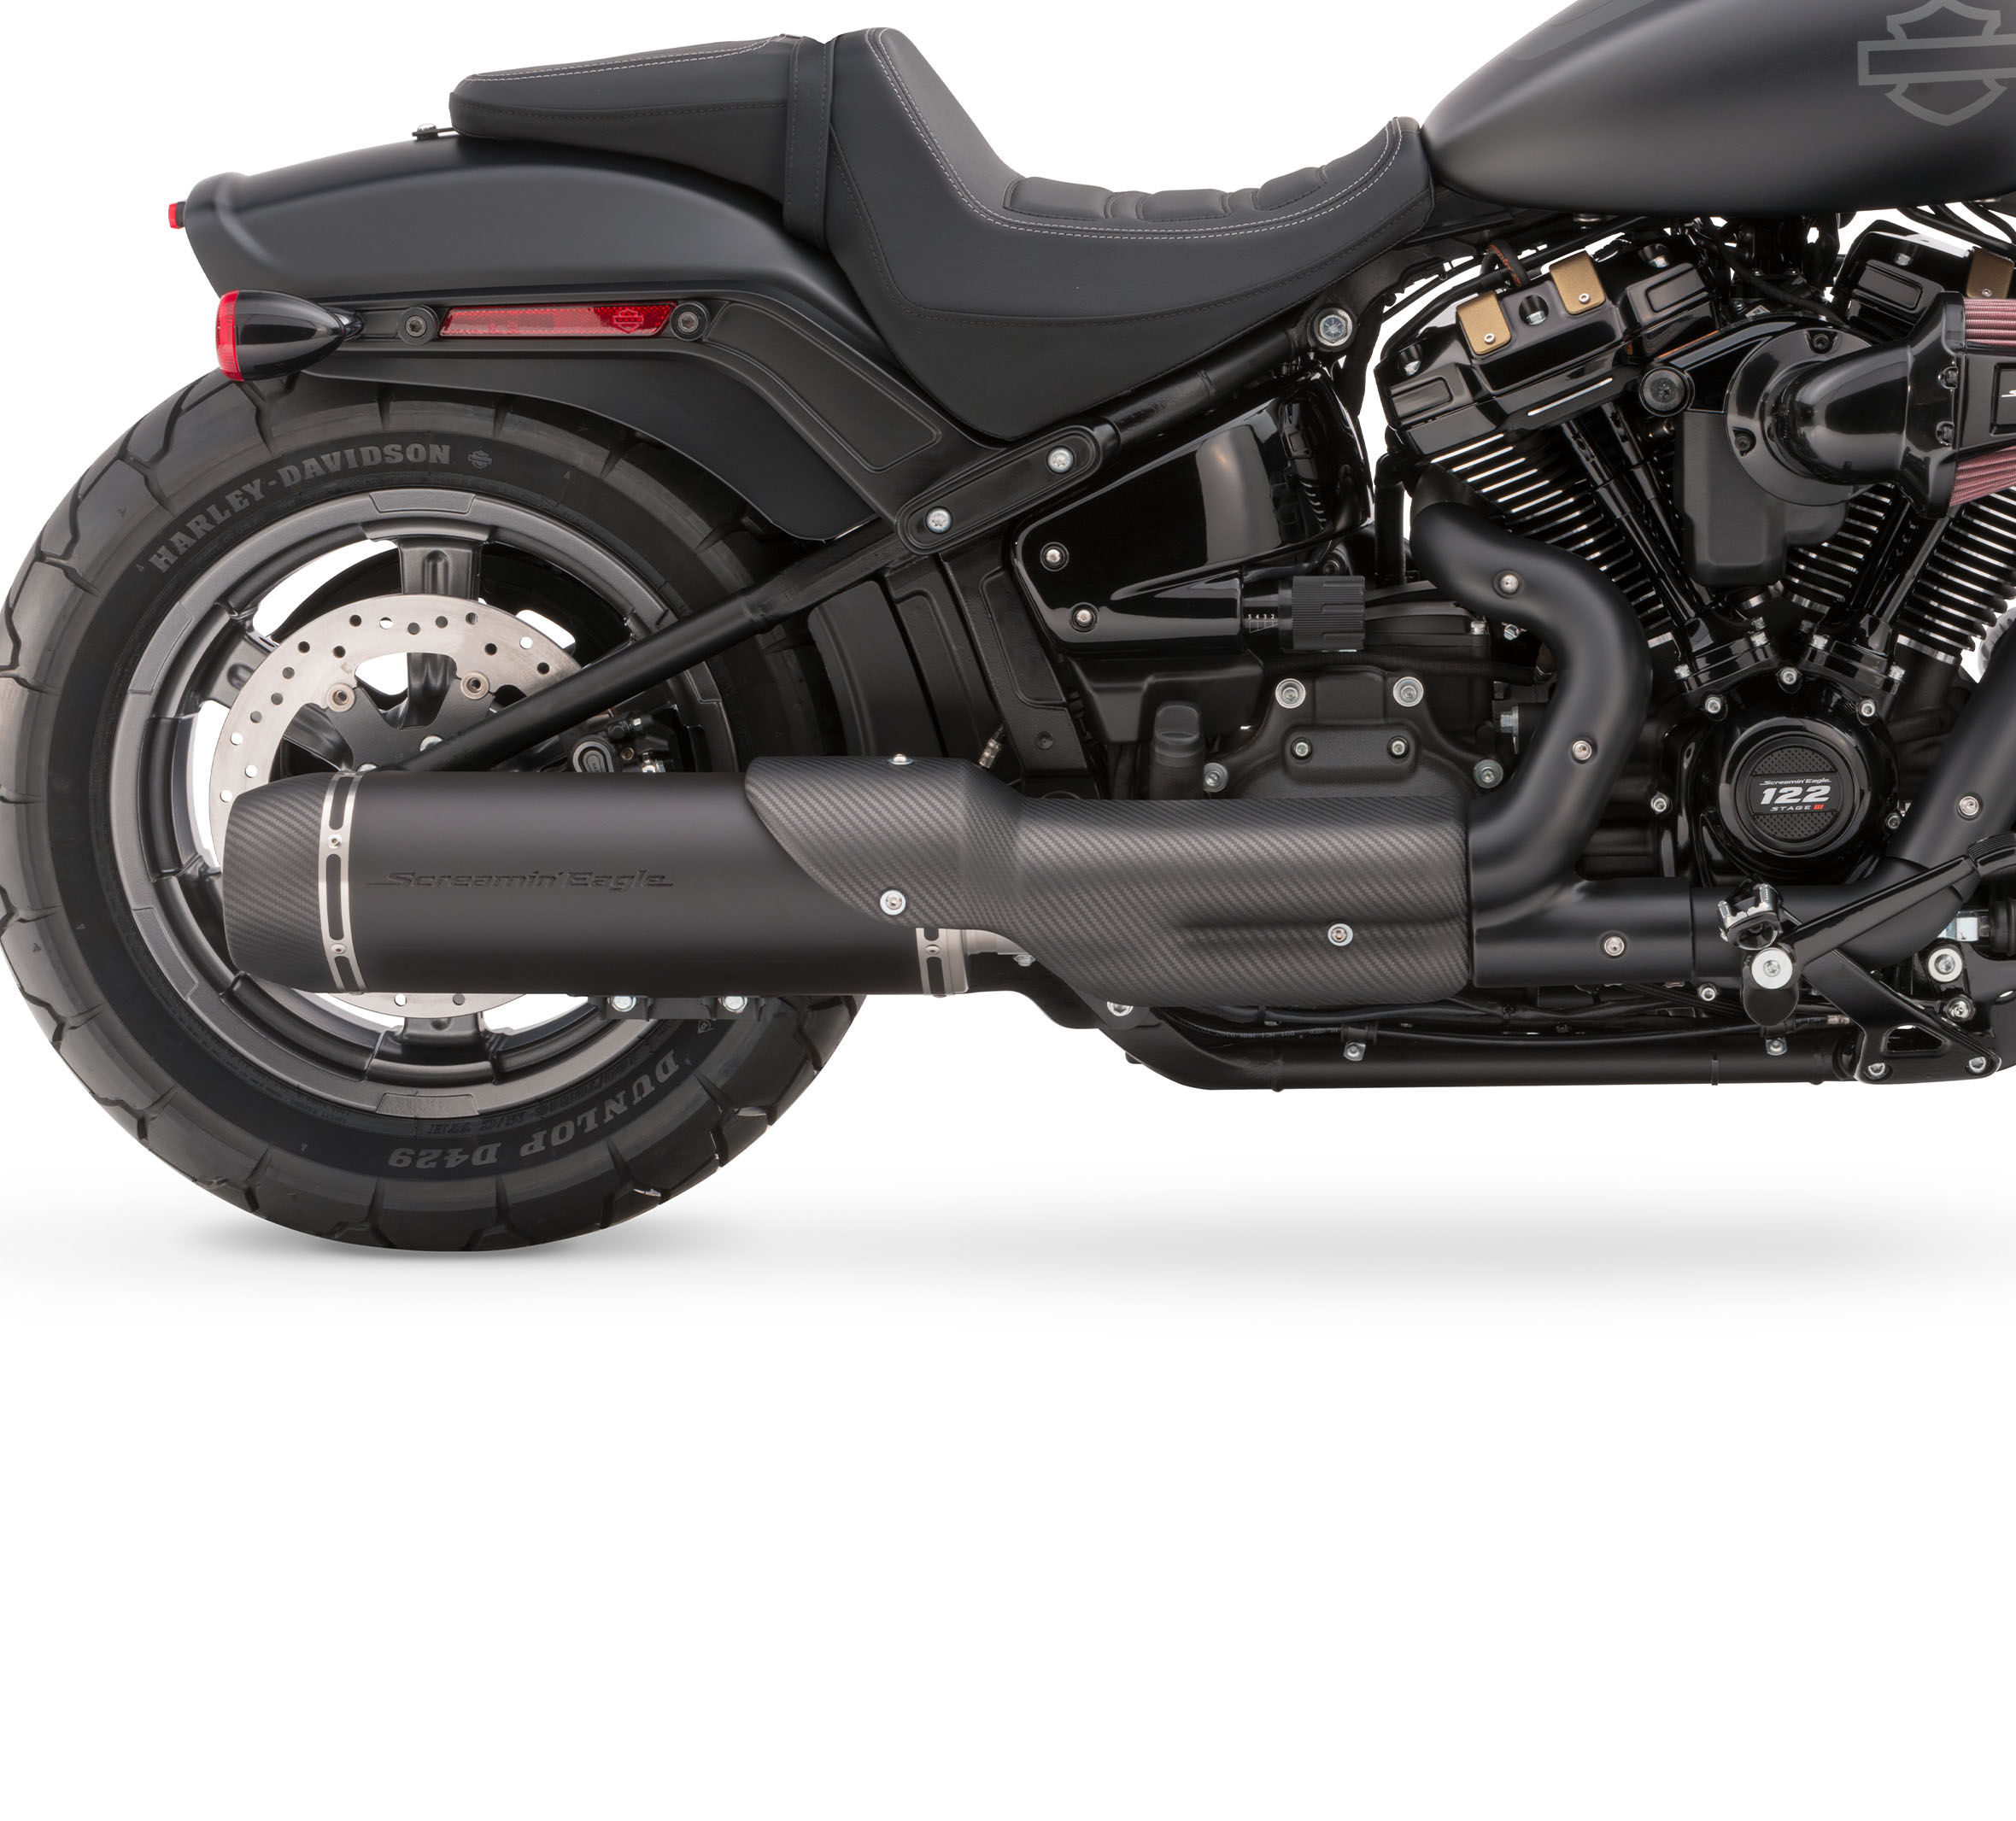 Harley Davidson Exhaust Systems Promotion Off58